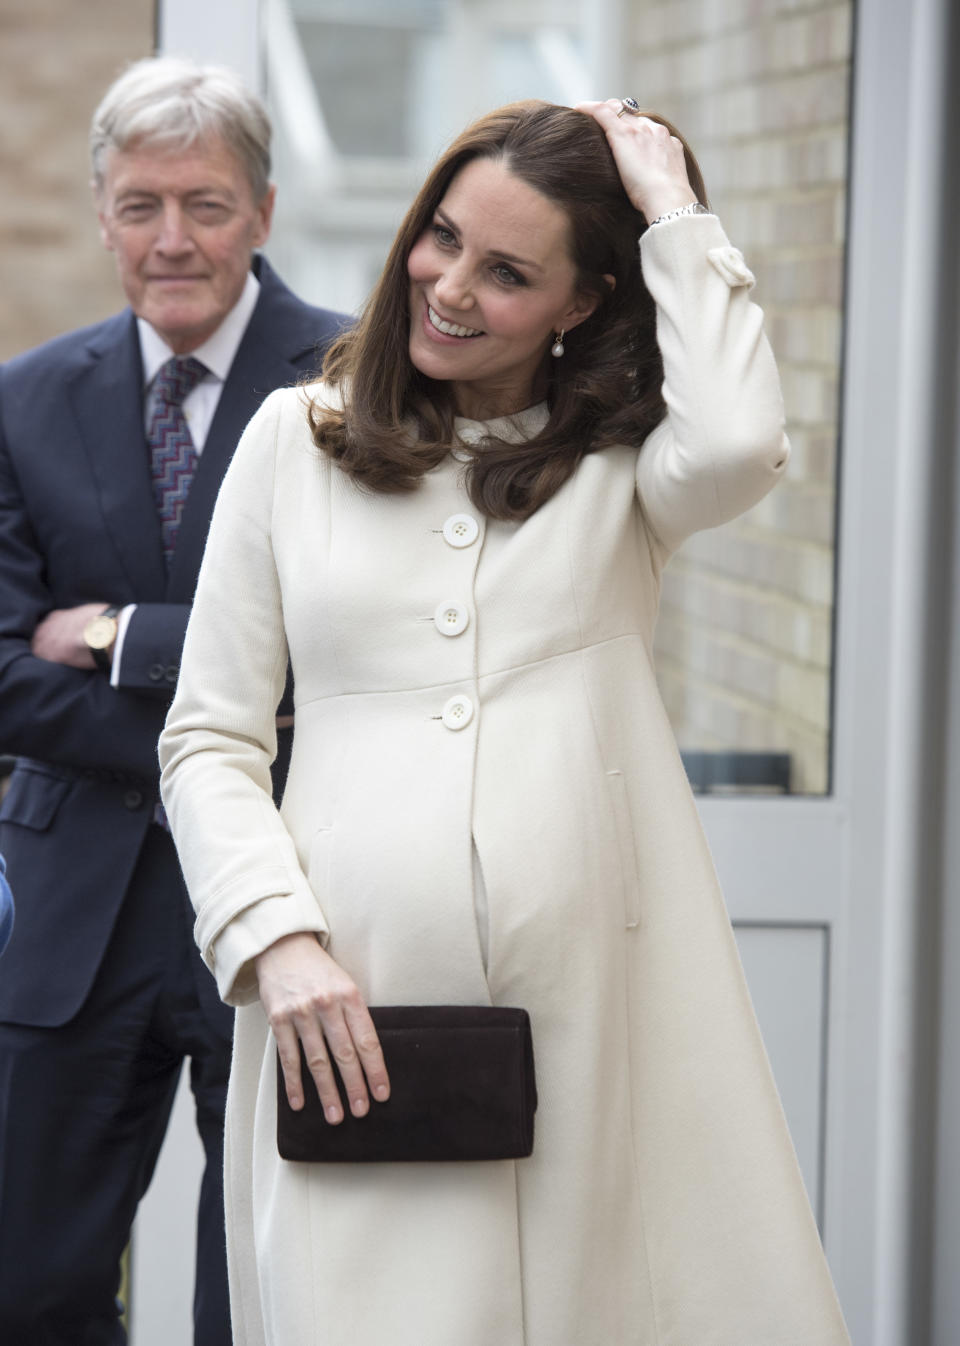 The Duchess of Cambridge’s fingers all appear to be roughly the same size [Photo: Getty]